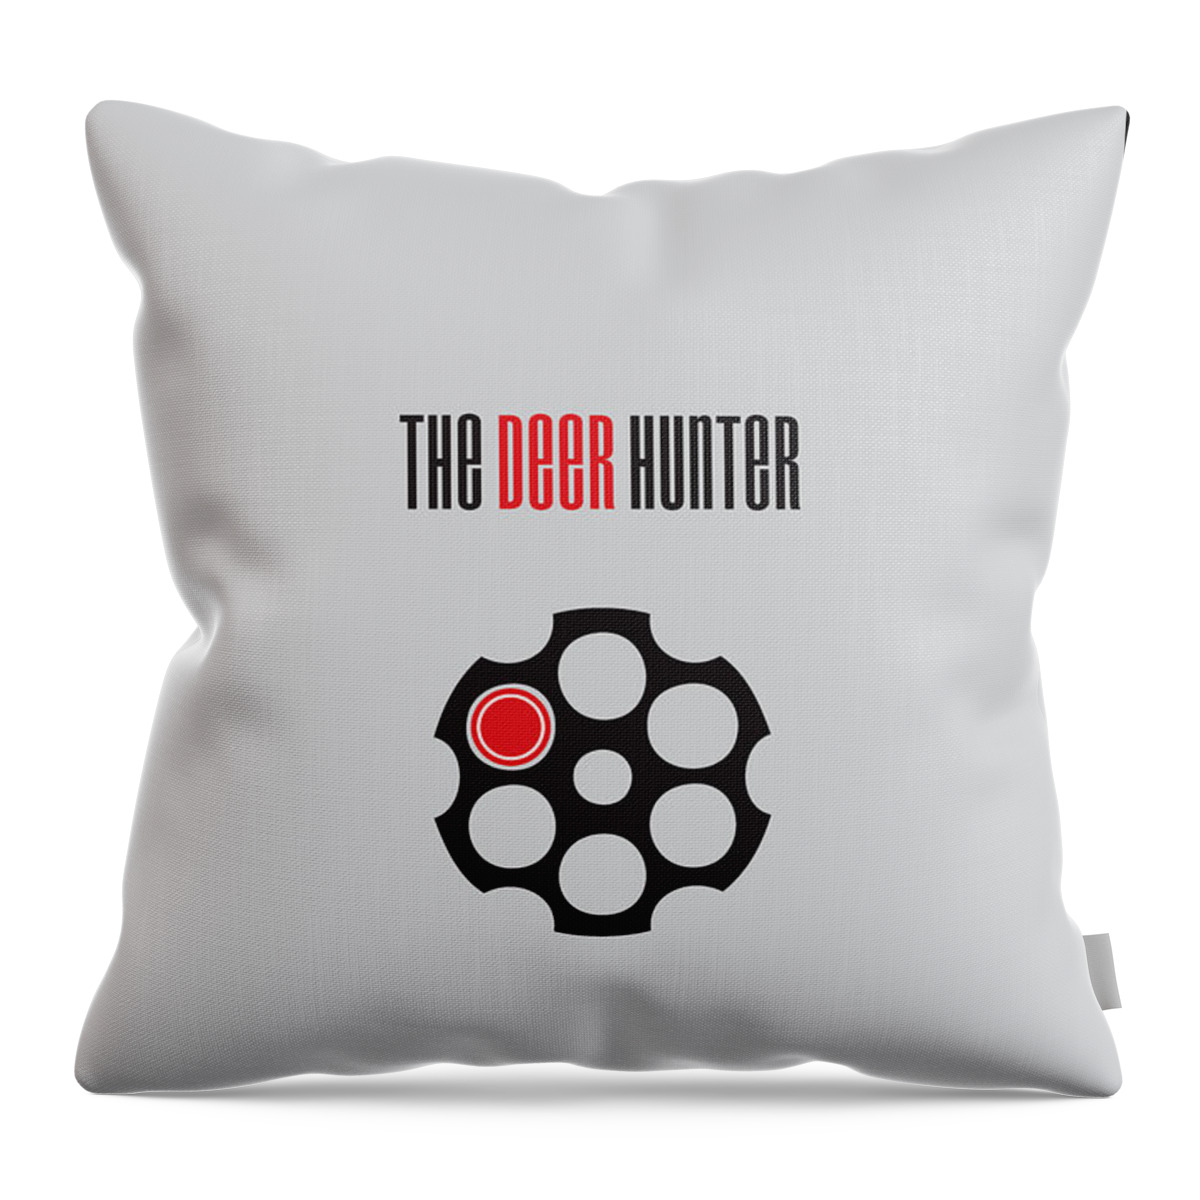 The Deer Hunter Throw Pillow featuring the digital art The Deer Hunter - Alternative Movie Poster by Movie Poster Boy